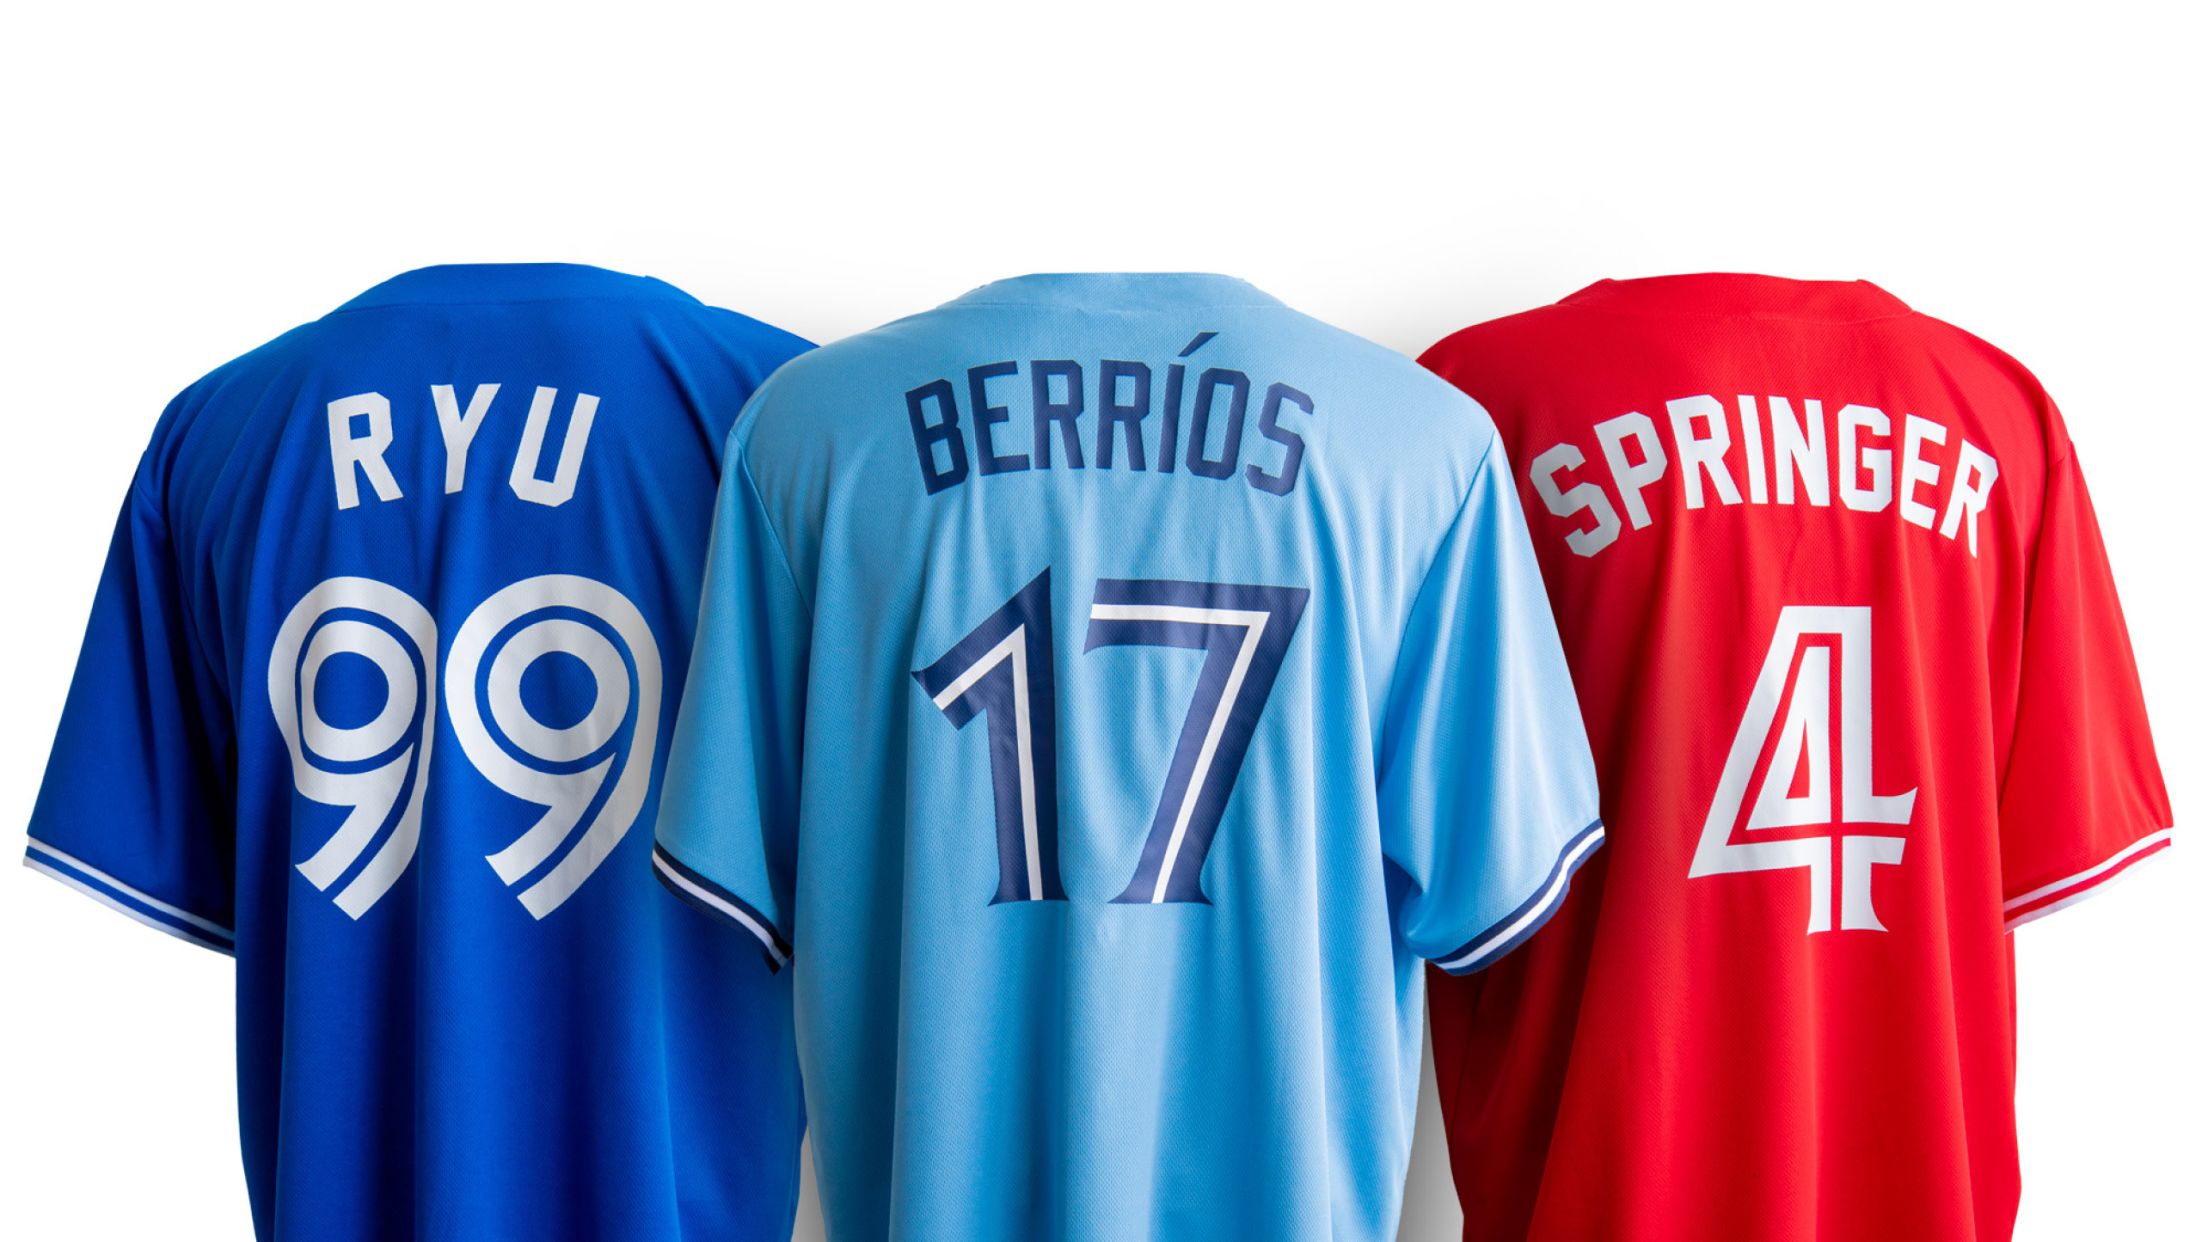 Toronto Blue Jays on X: Come early on 8/30 for Canada Baseball Day -1st  20K receive a Red @BlueJays Can. replica jersey pres. by @HondaCanada   / X